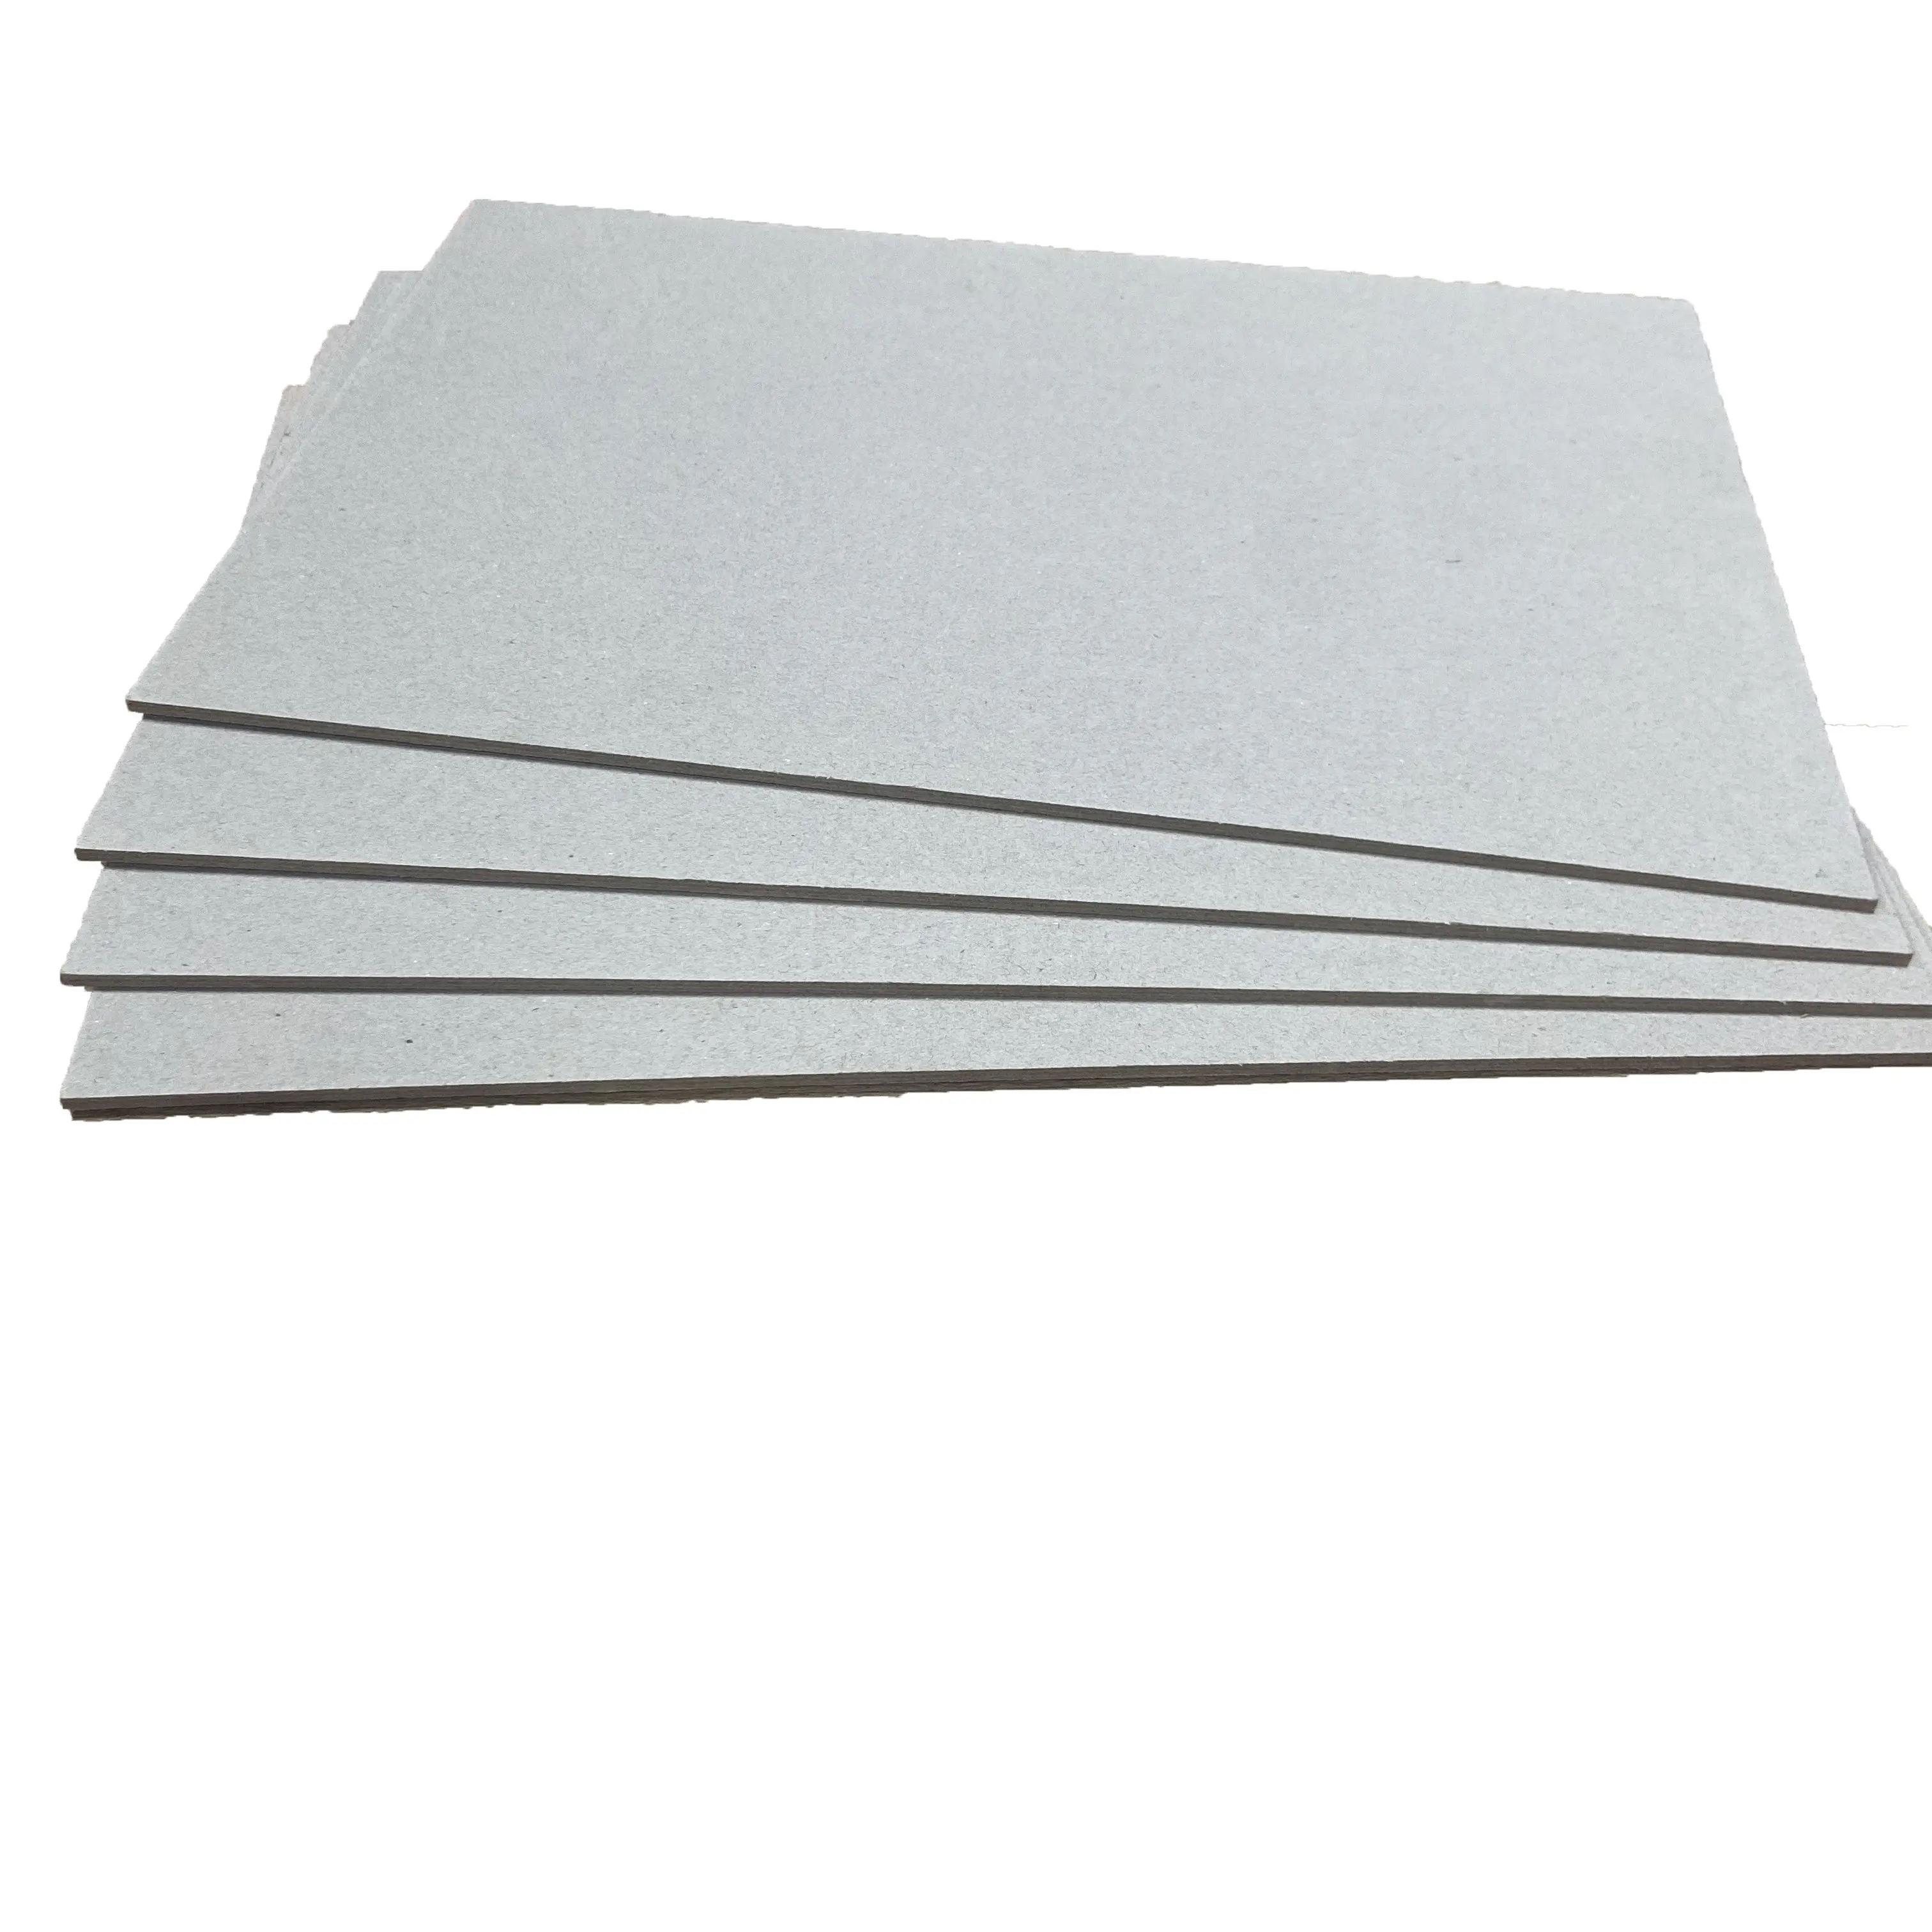 hot-selling Thickness 0.5-5mm Laminated Board Gray Board Paper